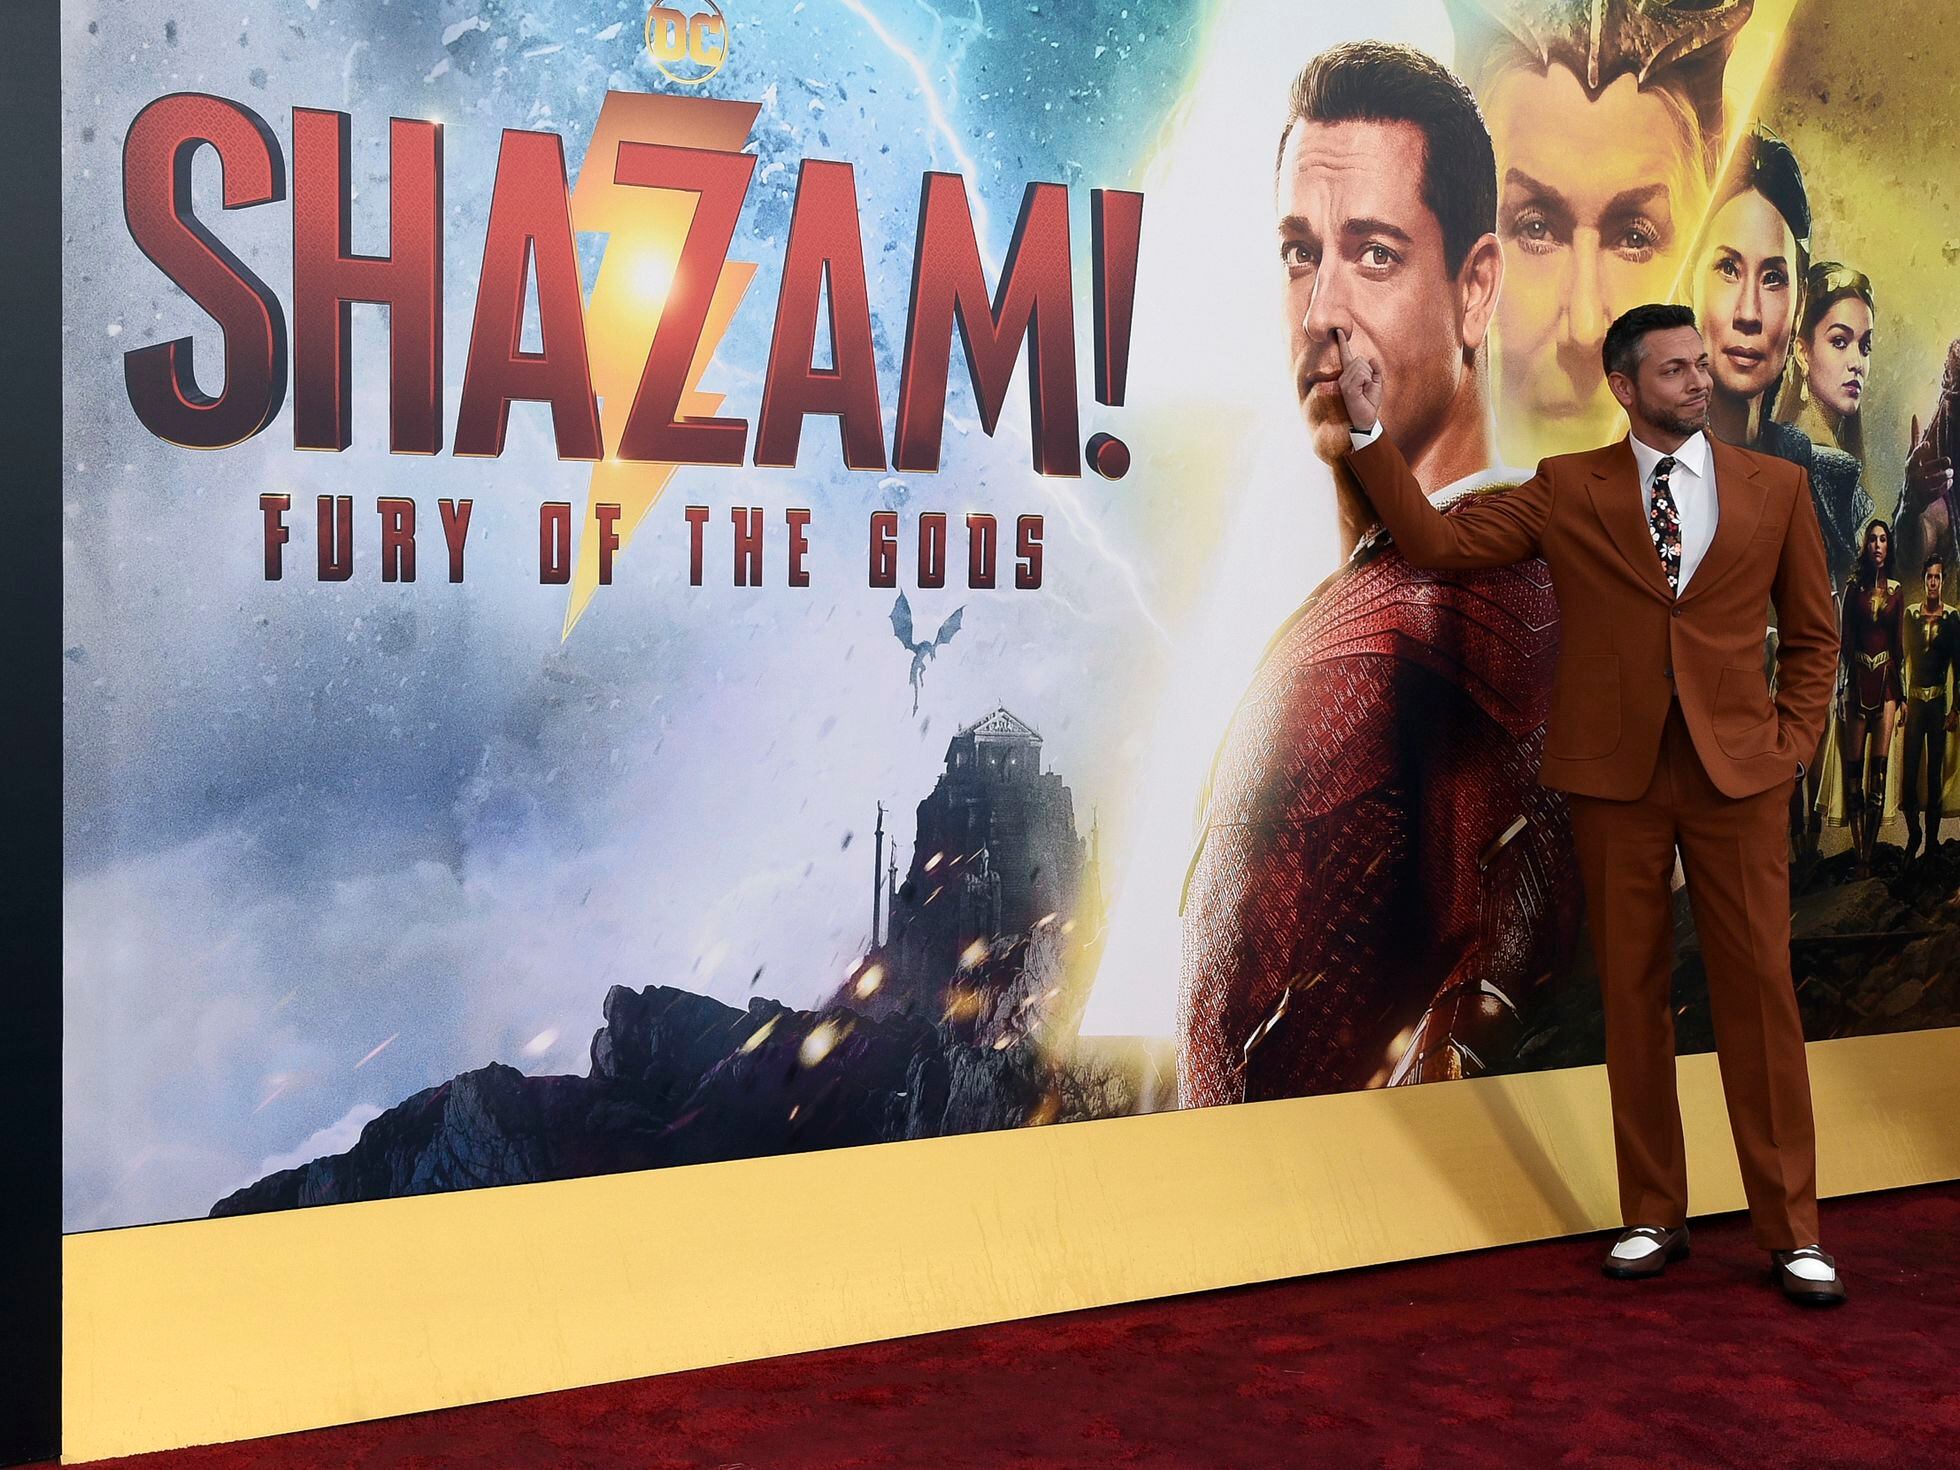 Shazam! Fury of the Gods' stumbles with $30.5 million debut, Culture